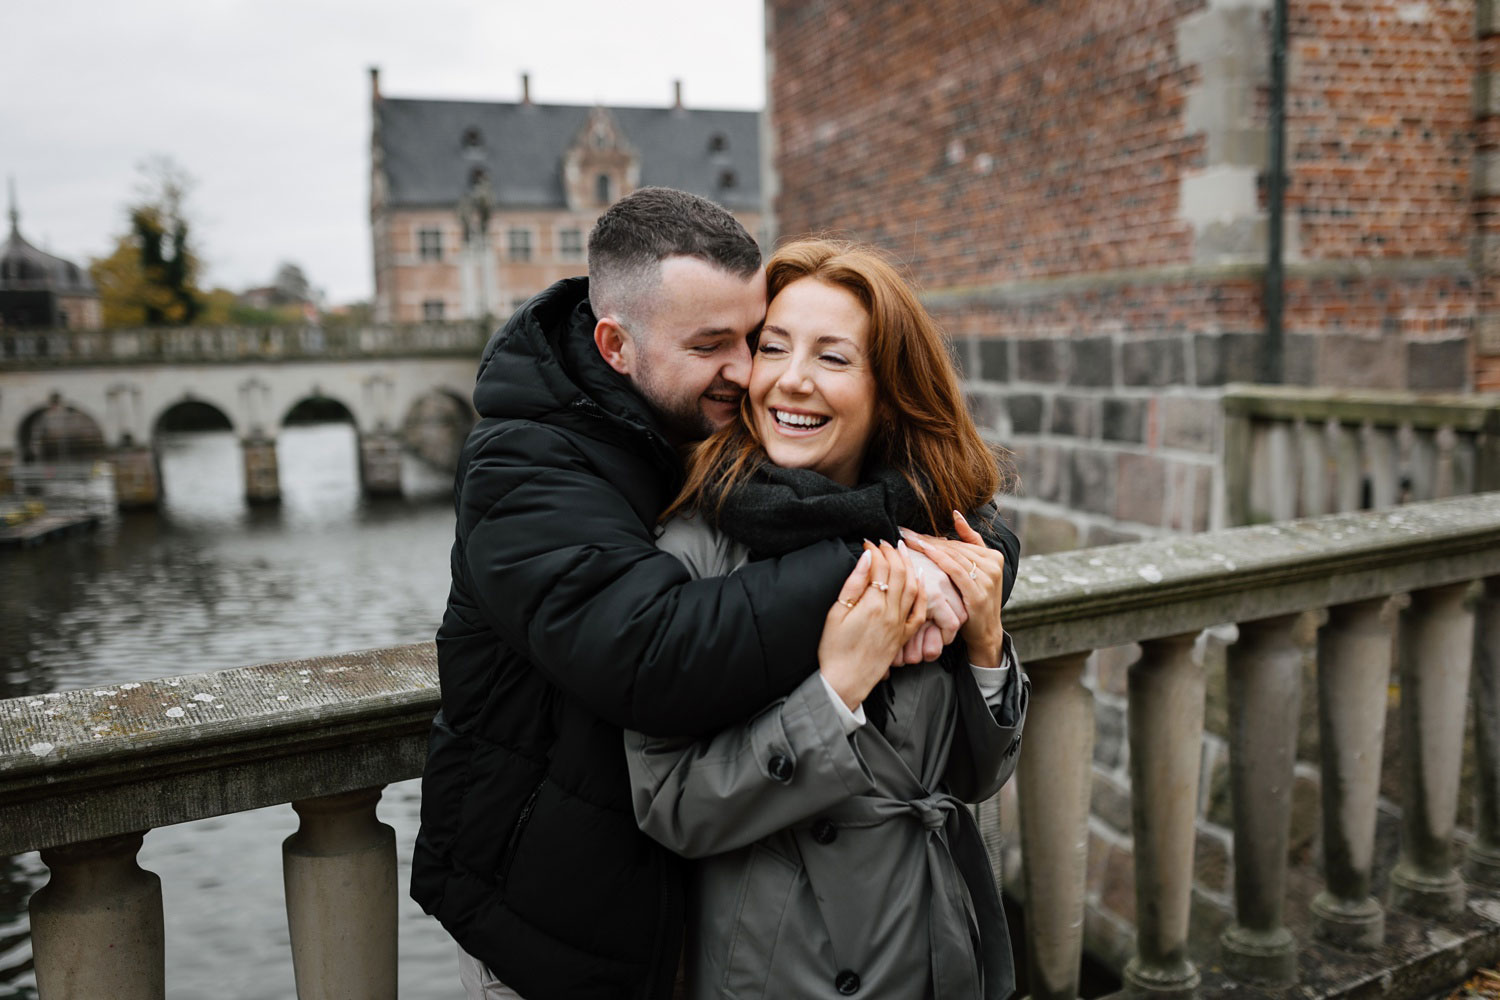 Candid moment of love at Frederiksborg Castle in Denmark